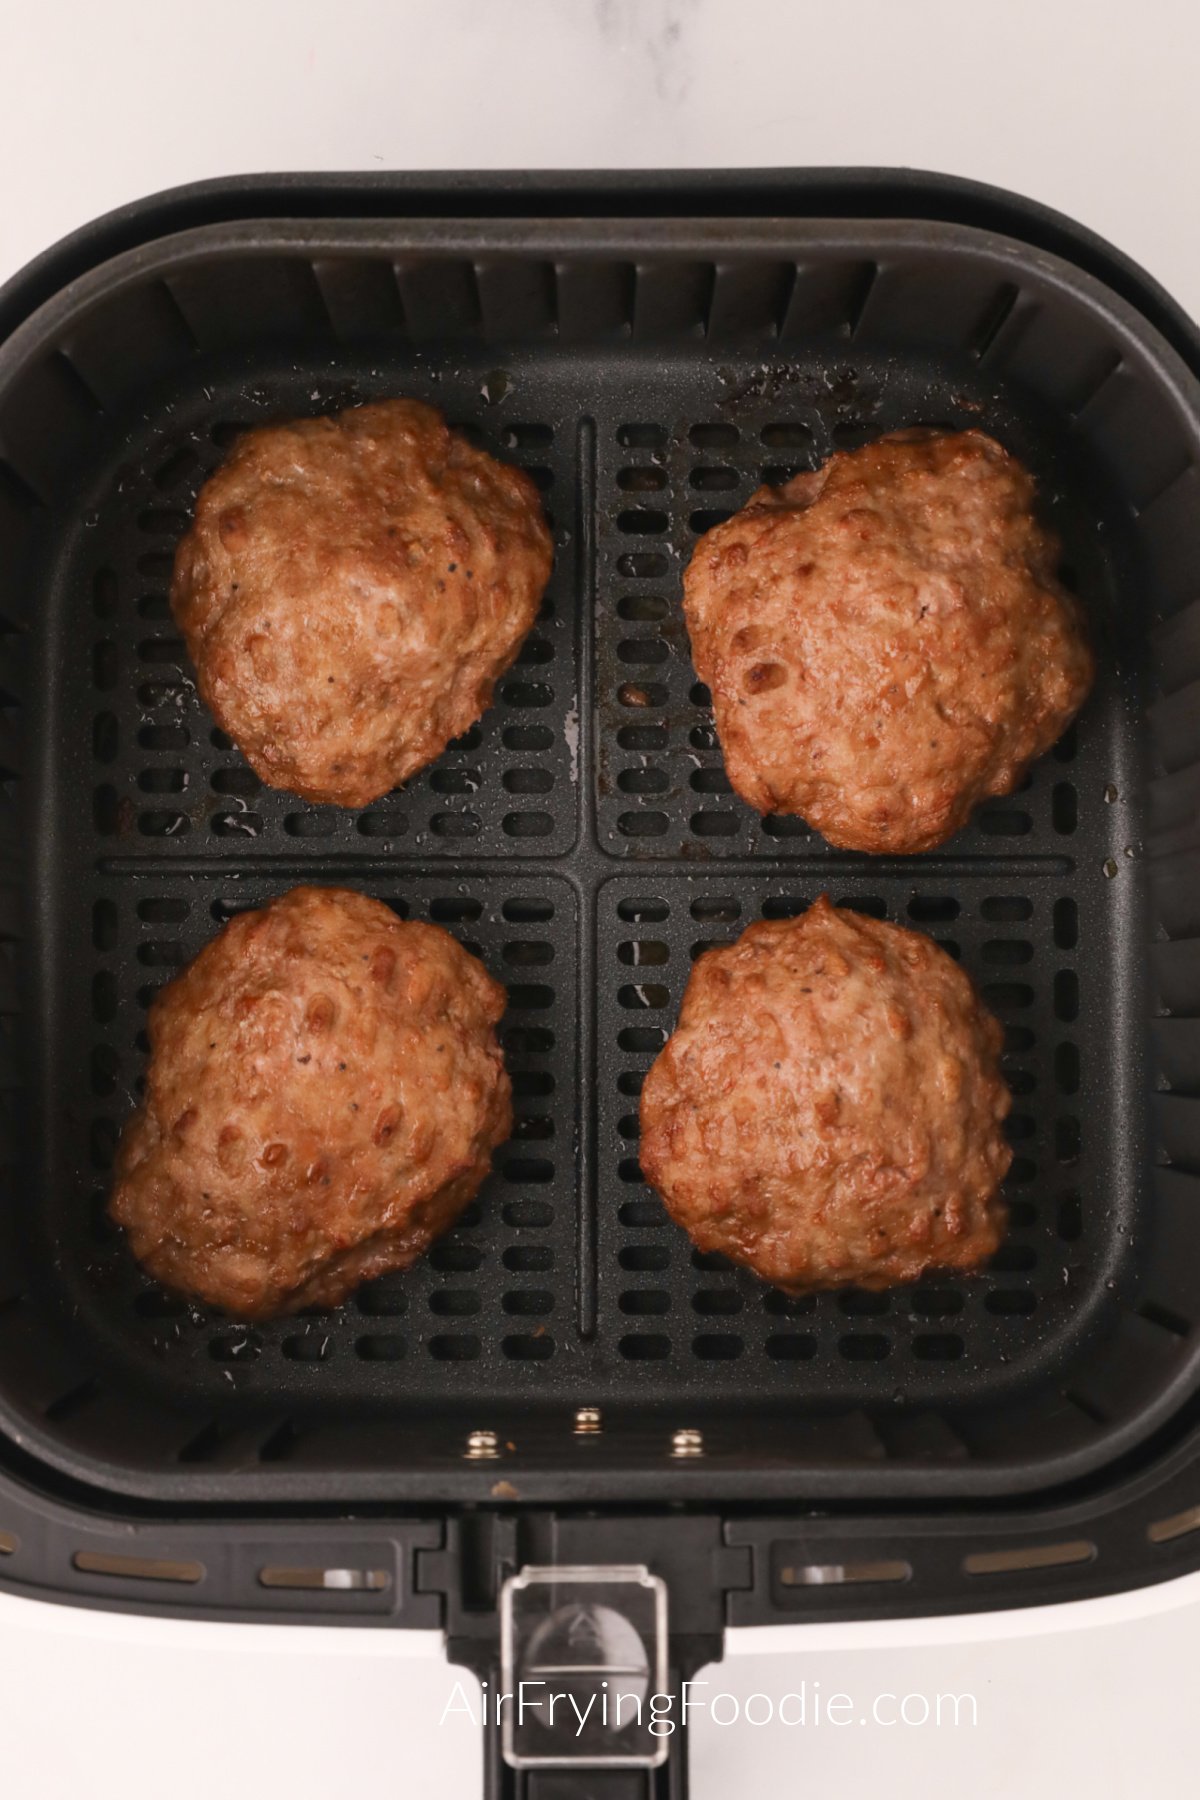 Fried Turkey Burgers in the basket of the air fryer.